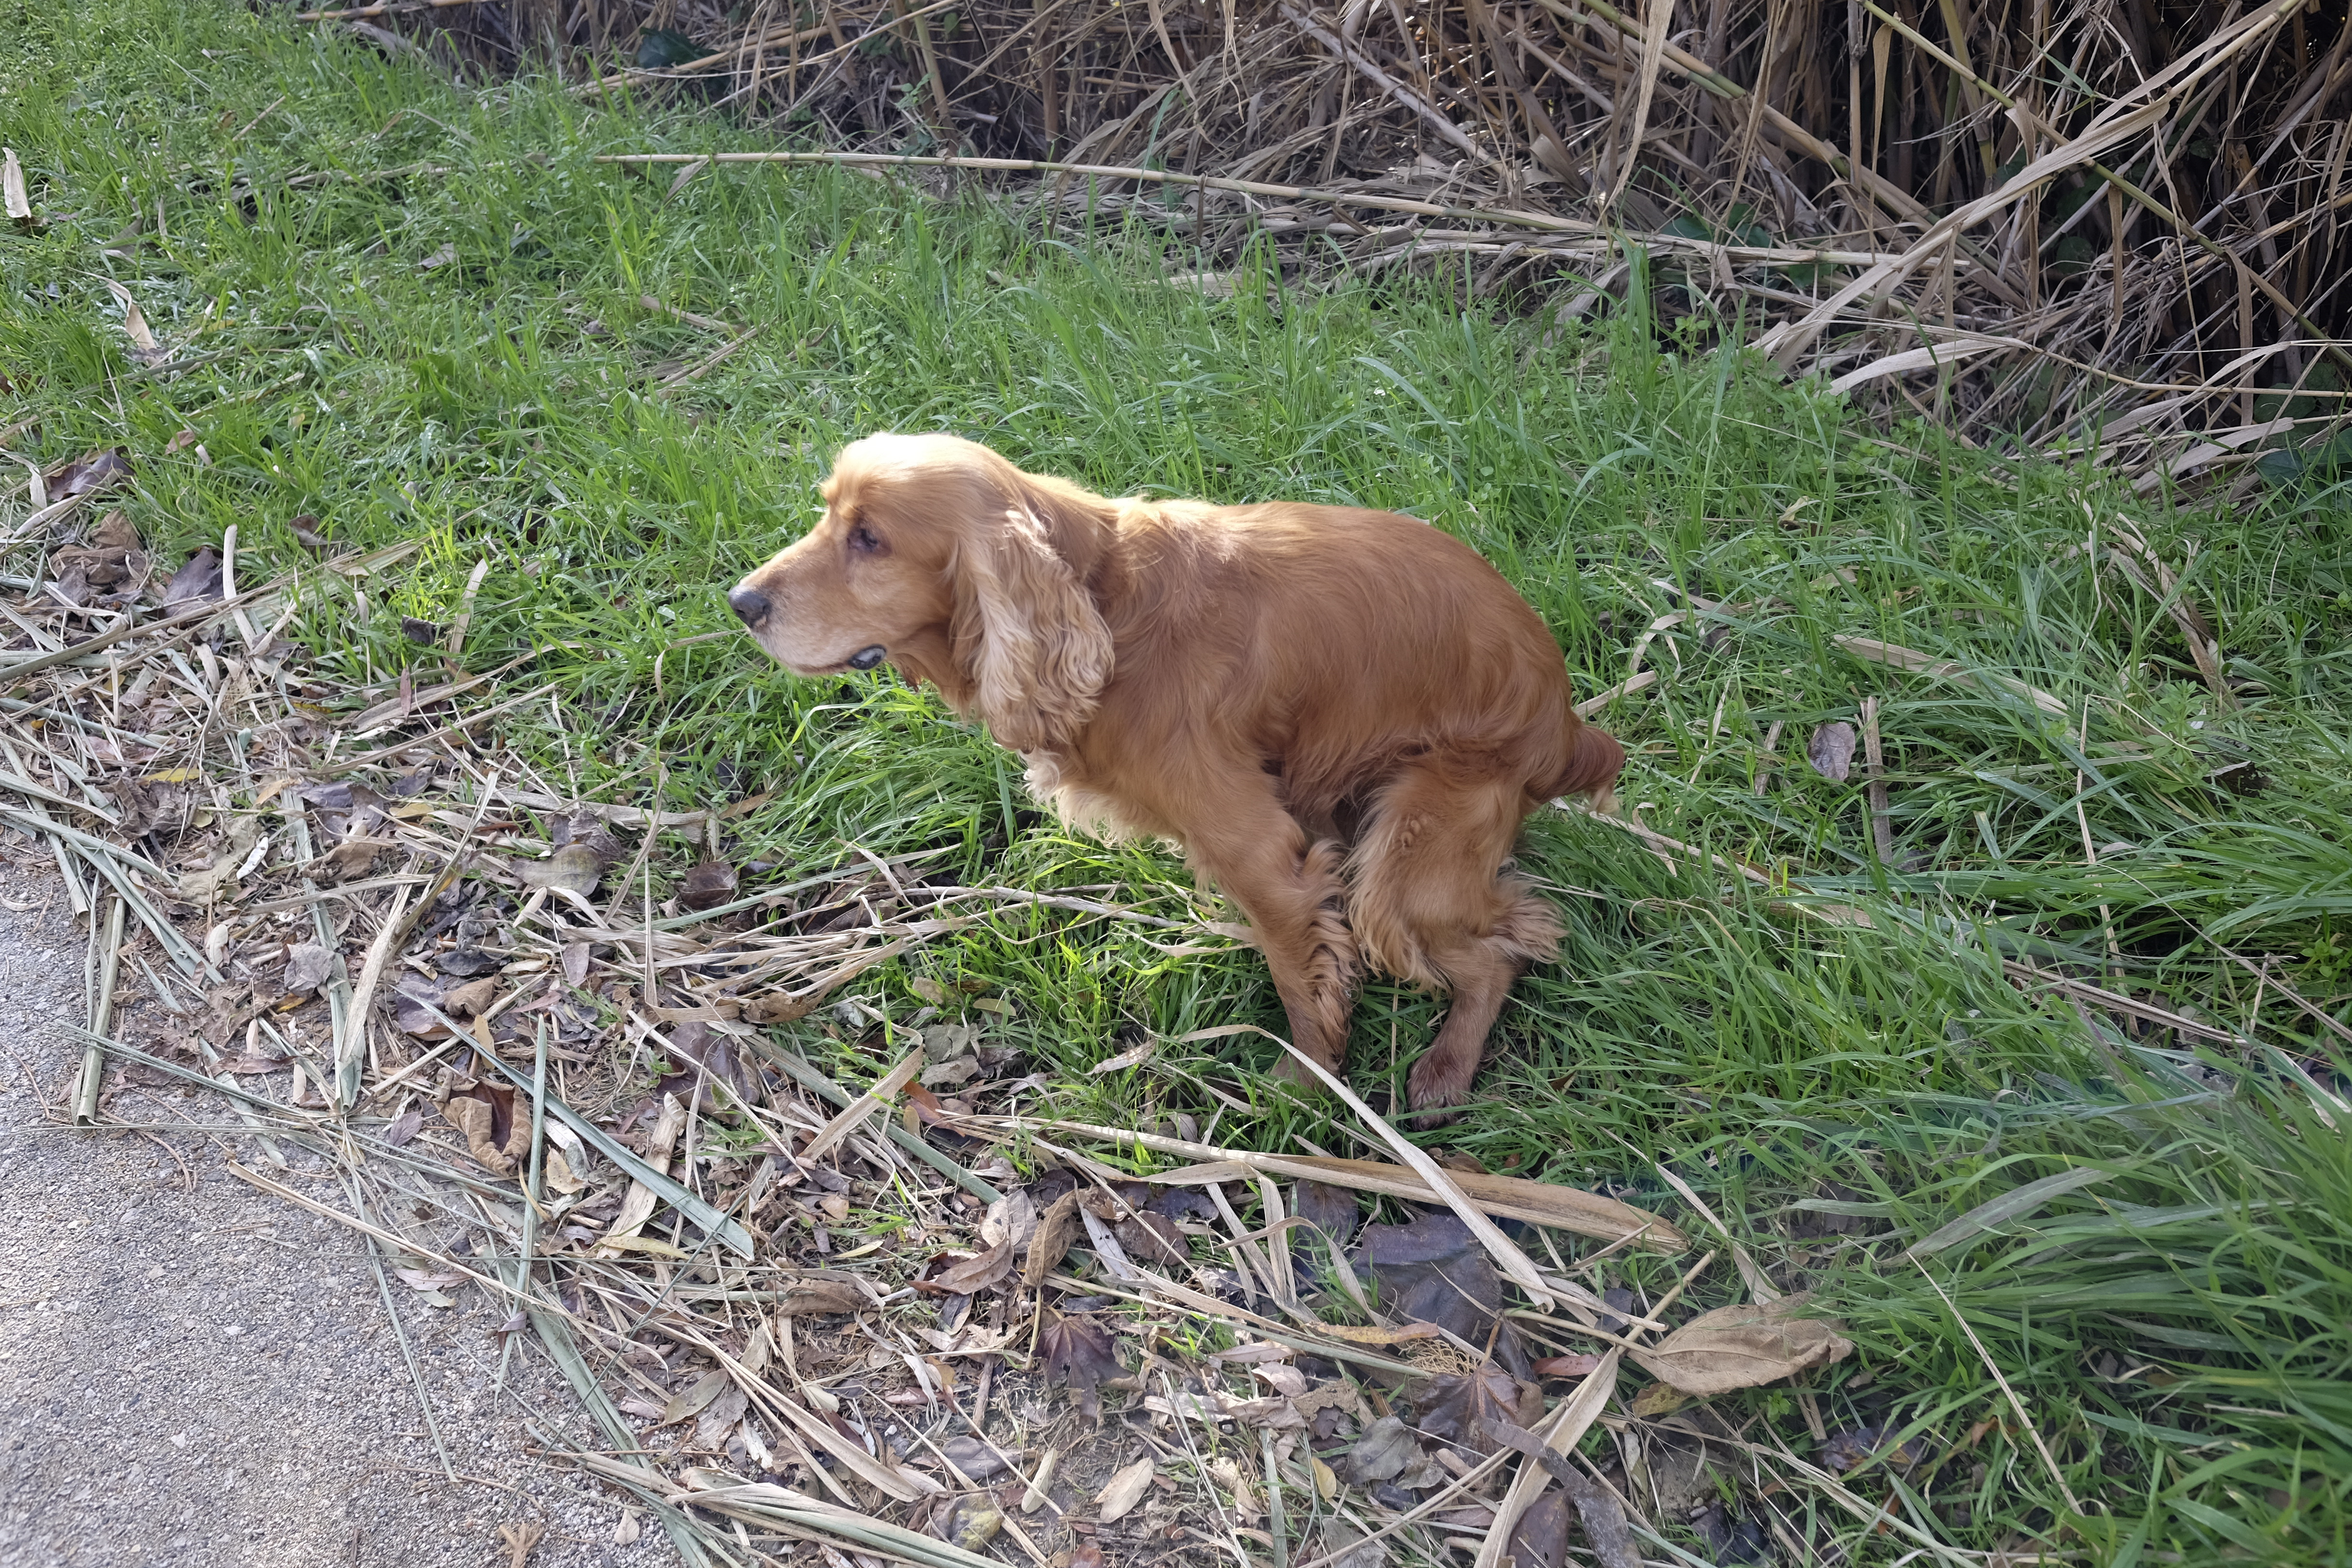 A brown dog squatting on the grass